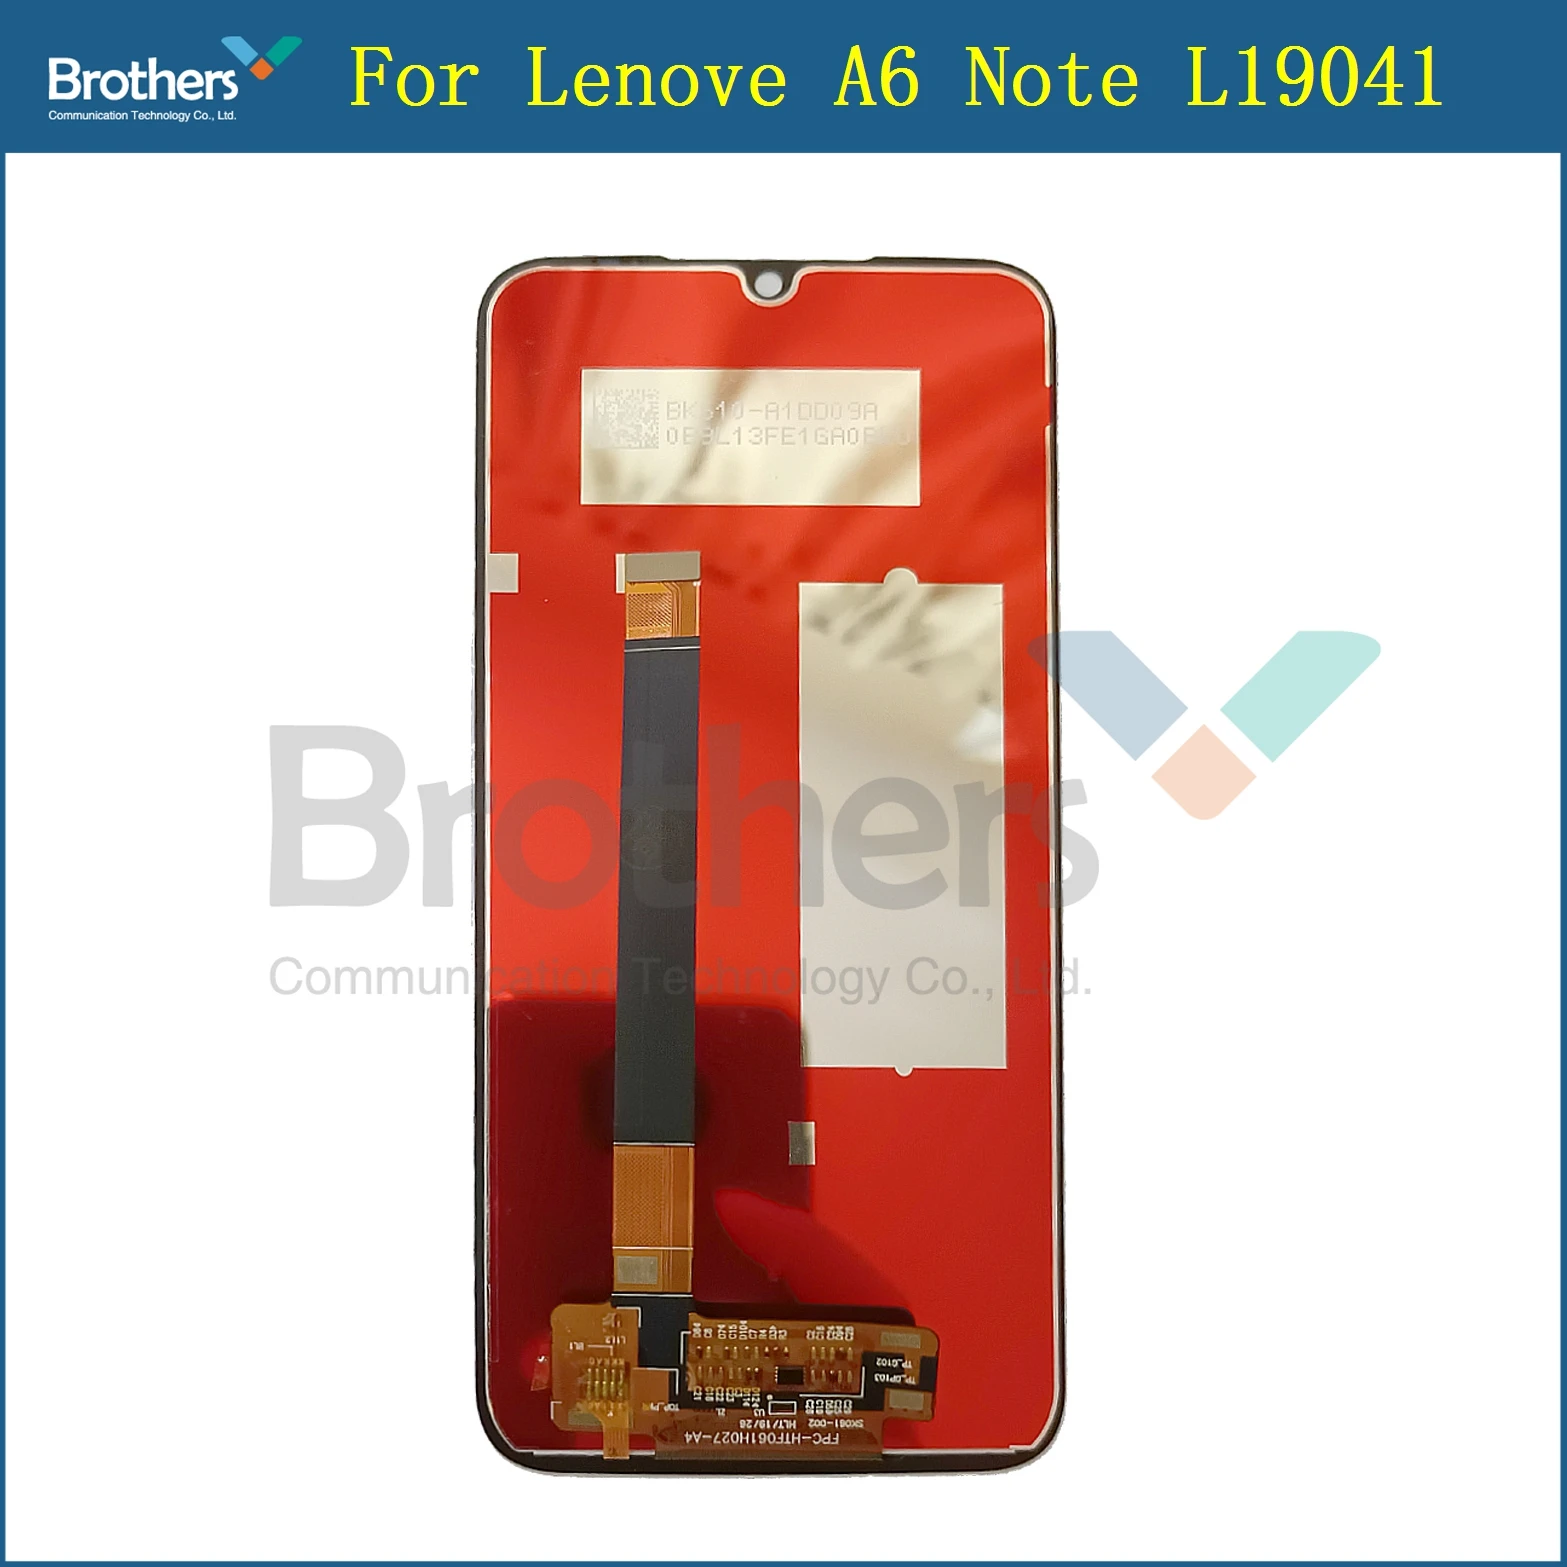 

6.09 inch LCD For lenovo a6 note PAGK0027IN, PAGK0027, L19041 LCD Display With Touch Screen Glass Digitizer Assembly